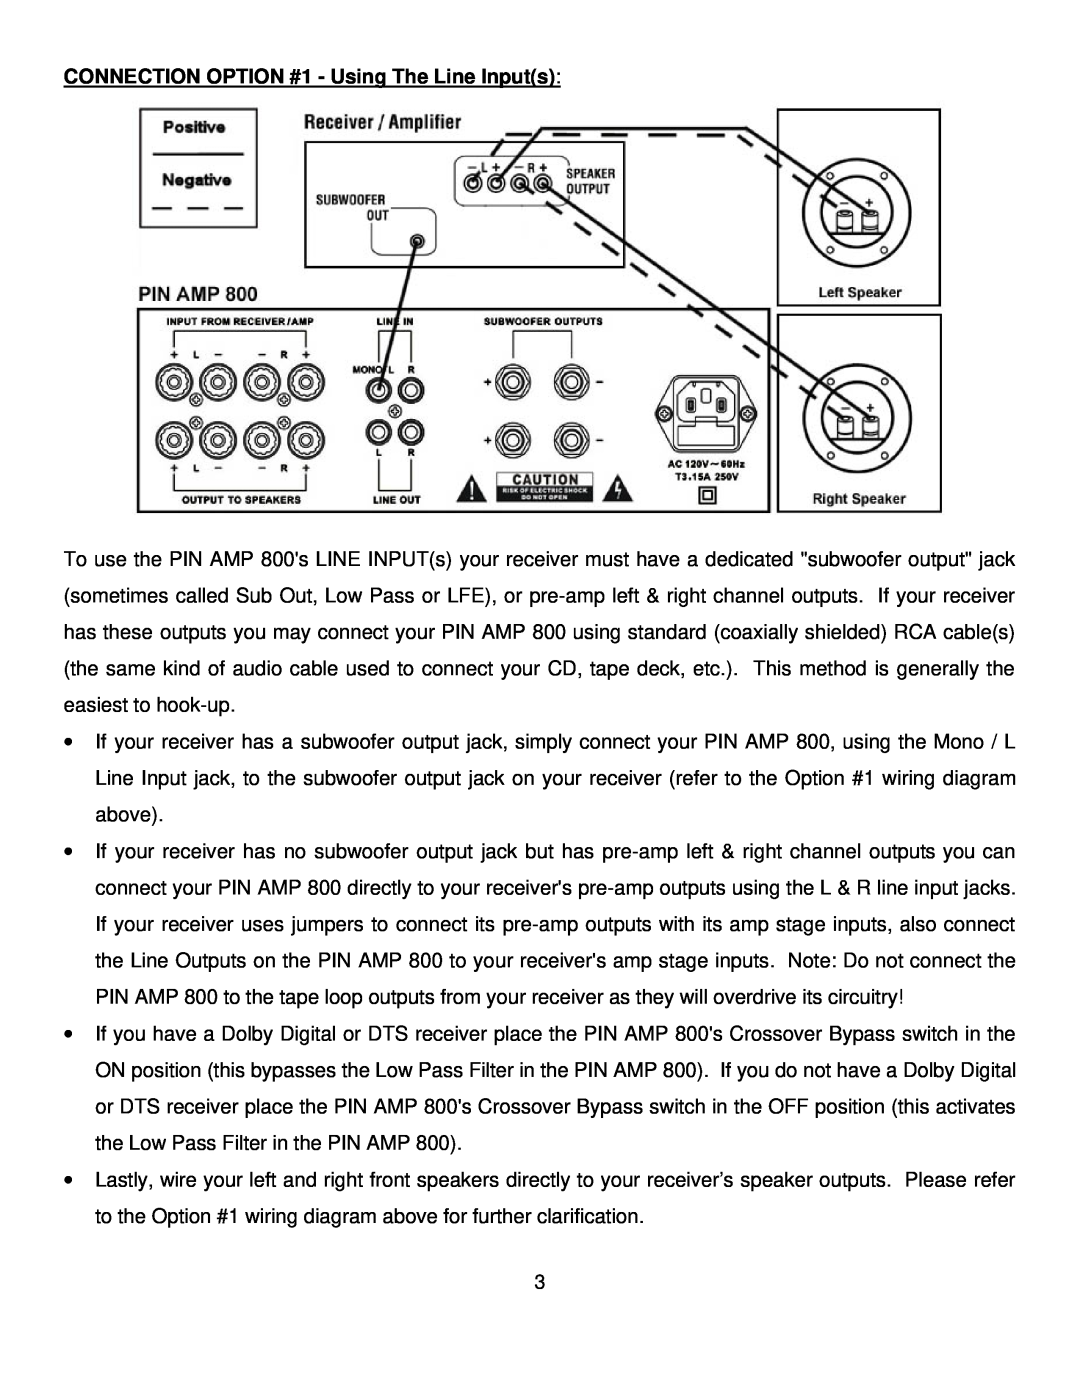 Pinnacle Speakers 800 owner manual CONNECTION OPTION #1 - Using The Line Inputs 